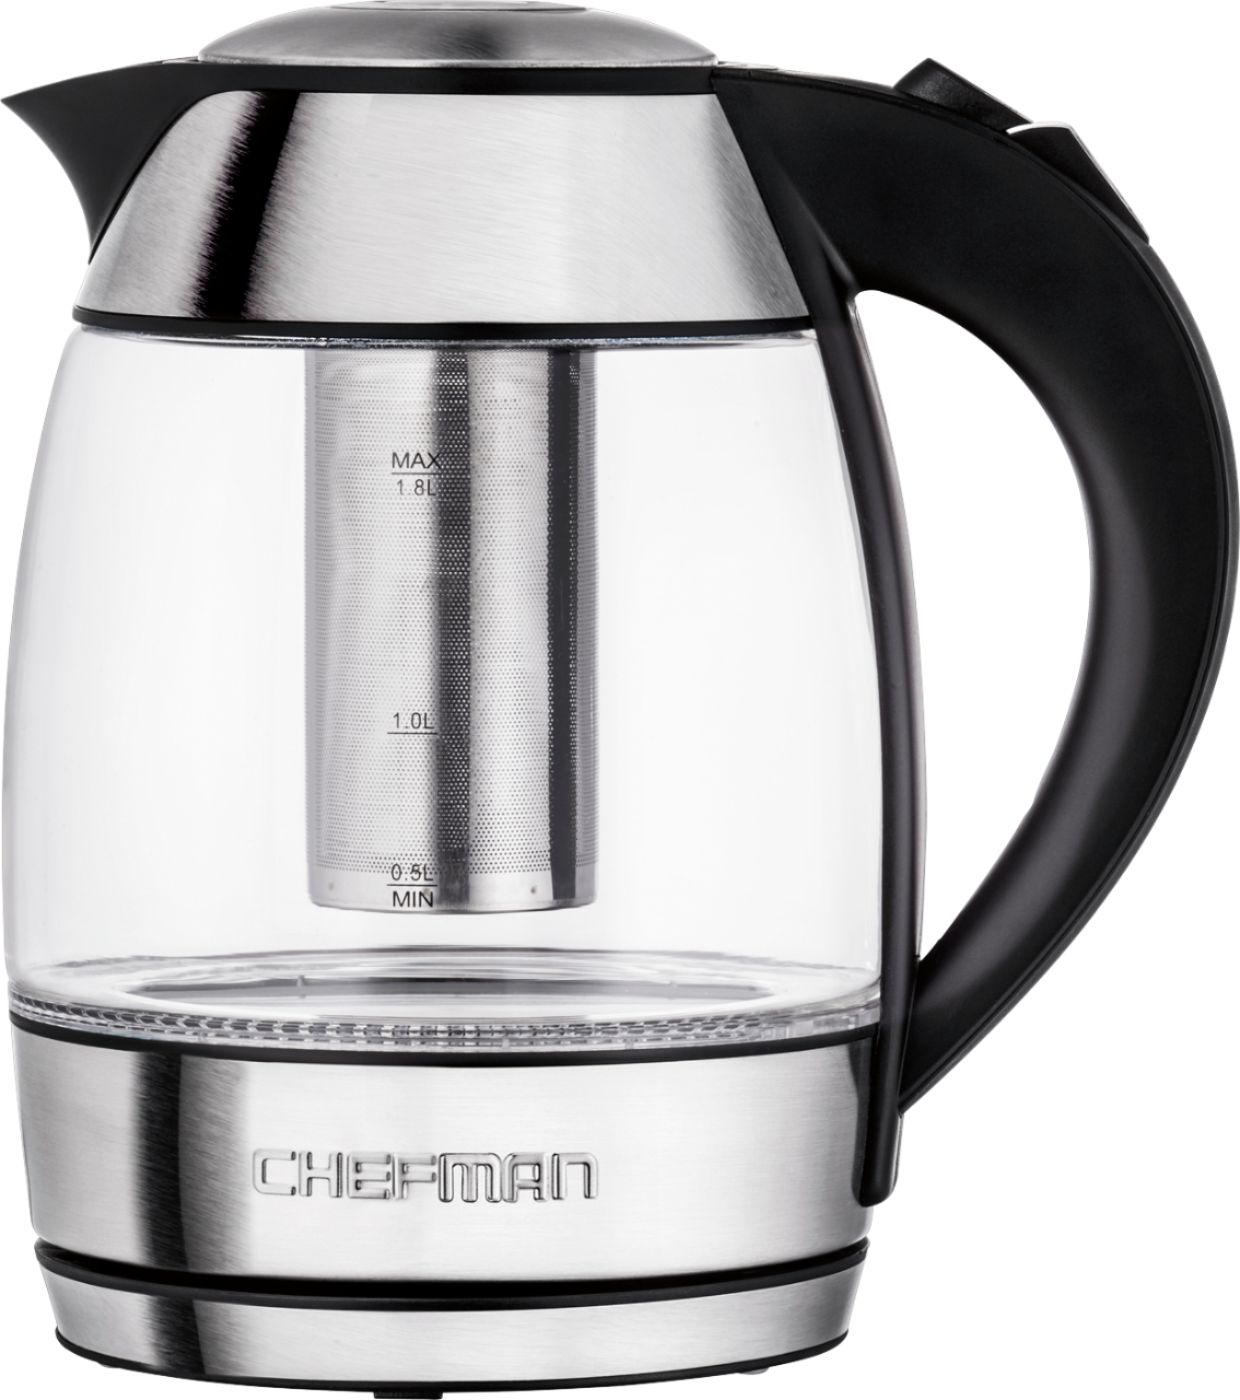 Chefman Stainless Steel Electric Kettle RJ11-18-TI-KW, Color